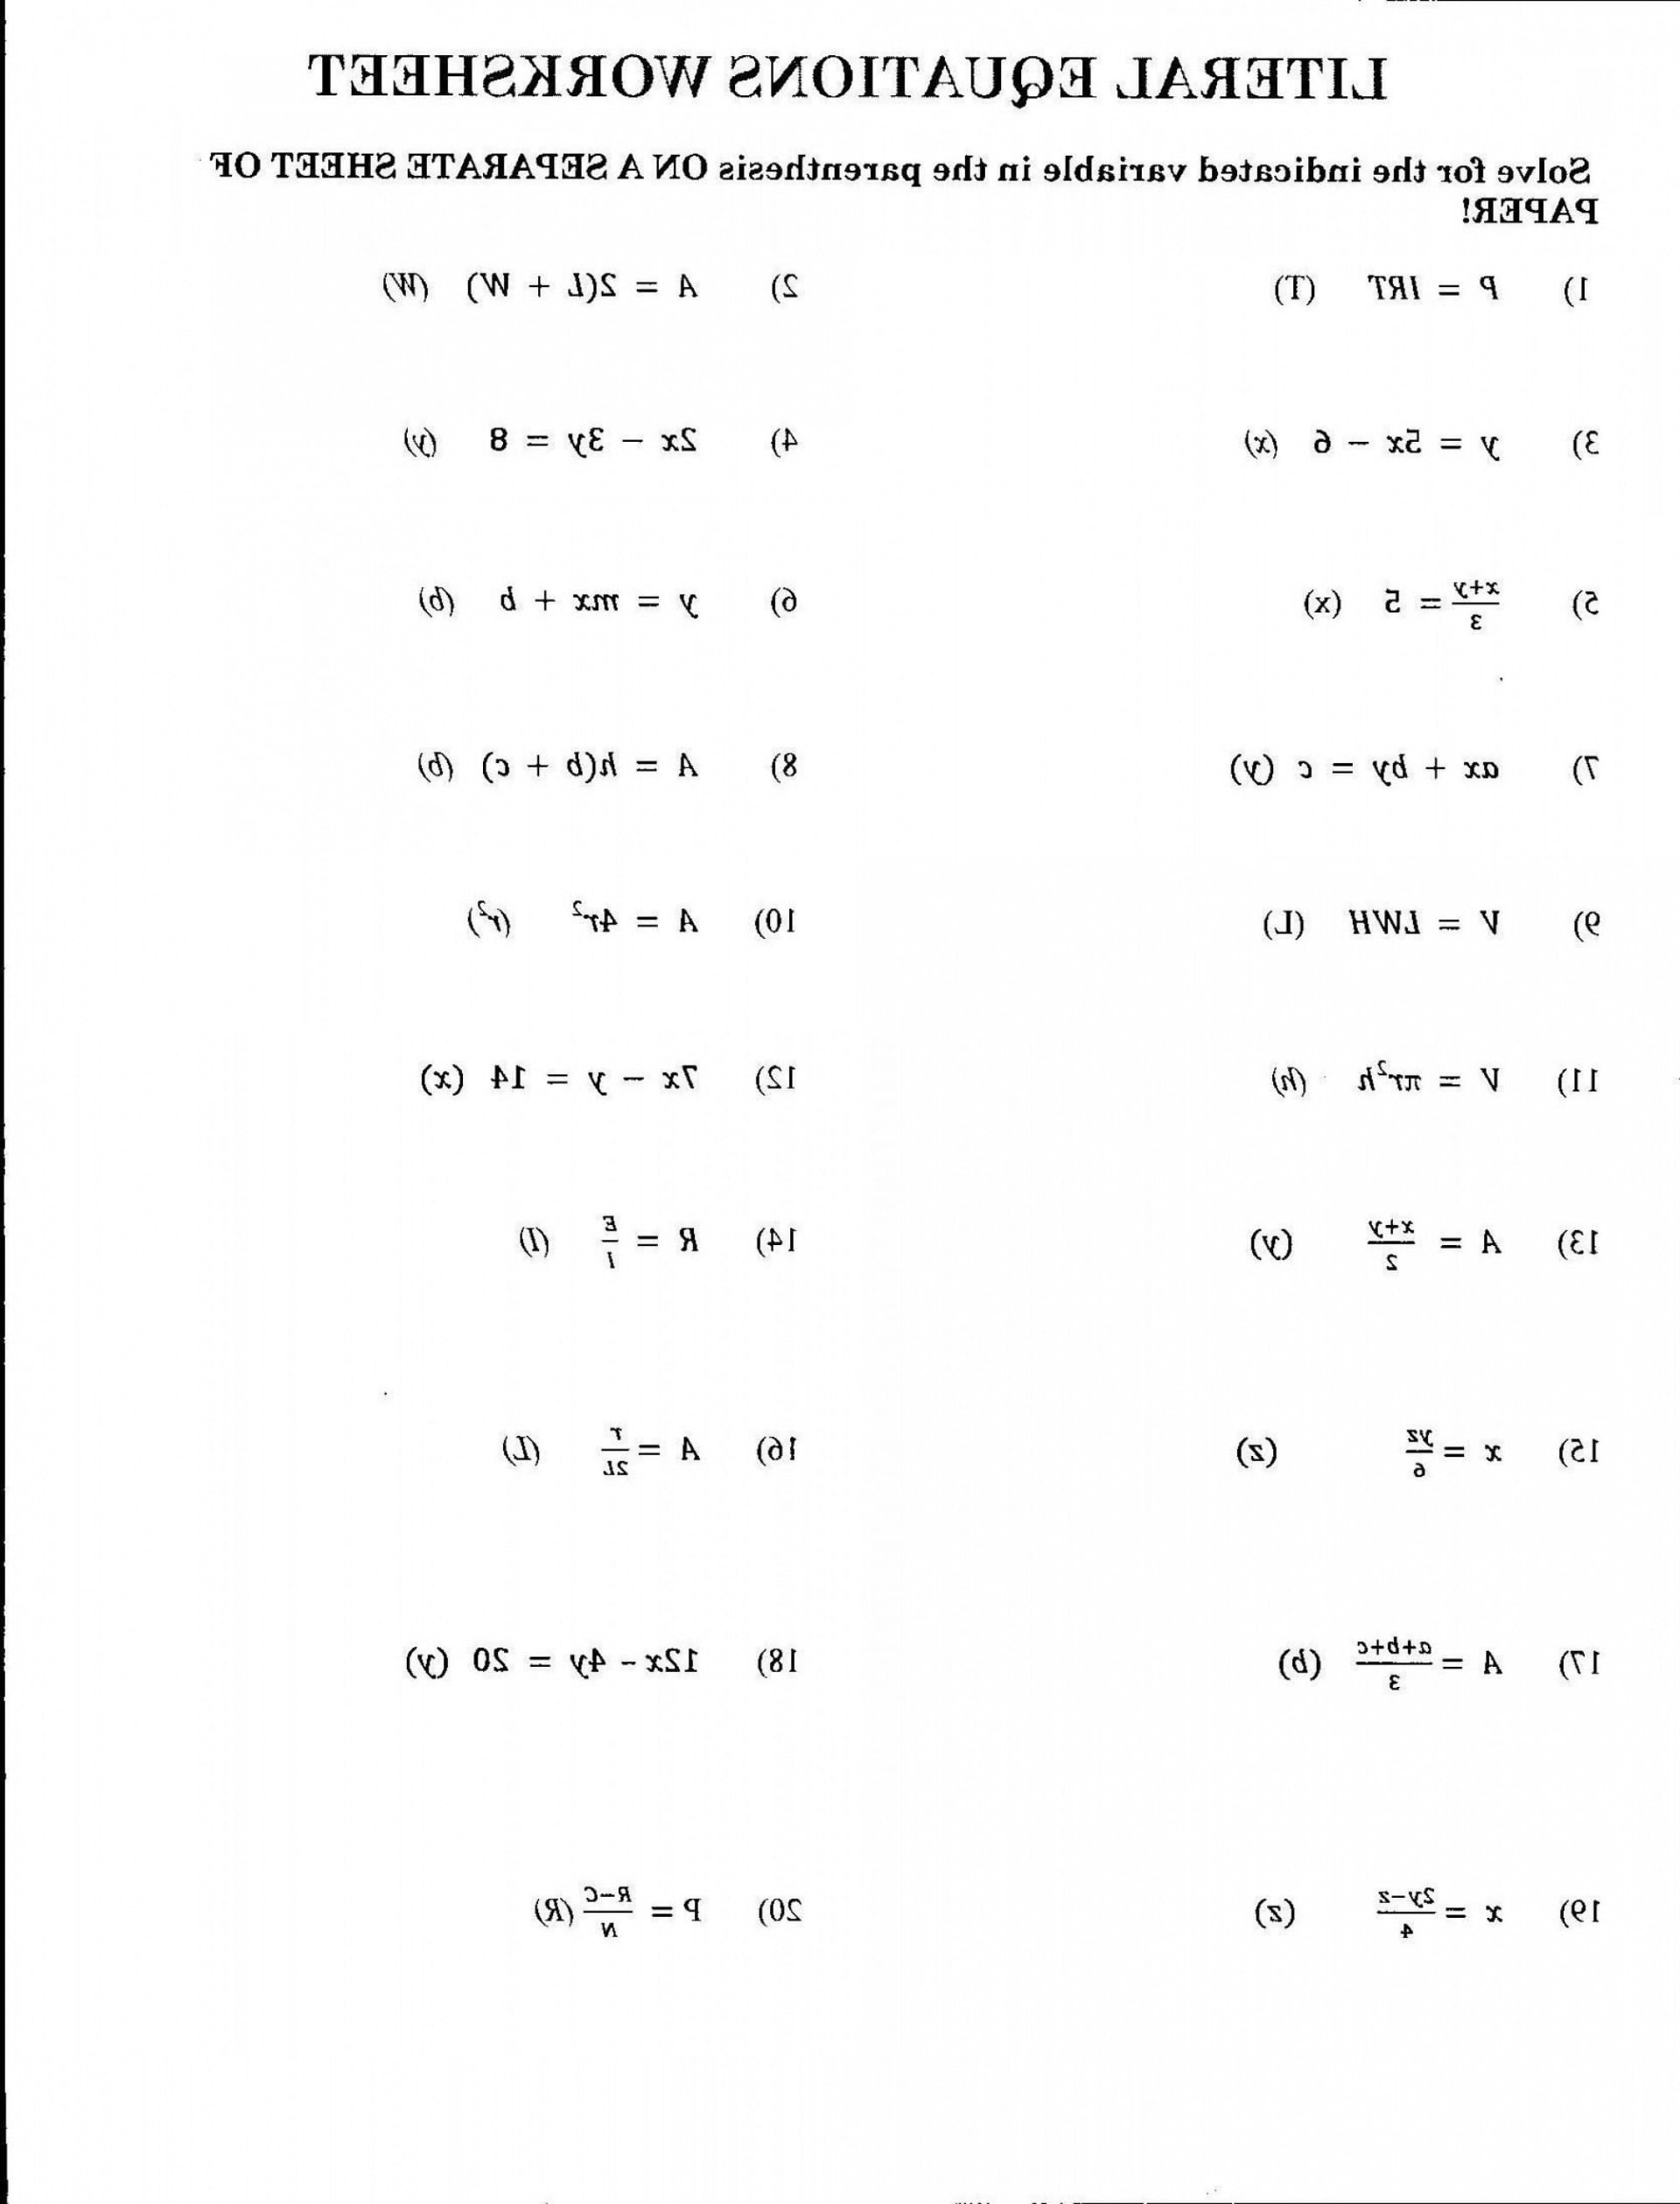 linear equations word problems pdf